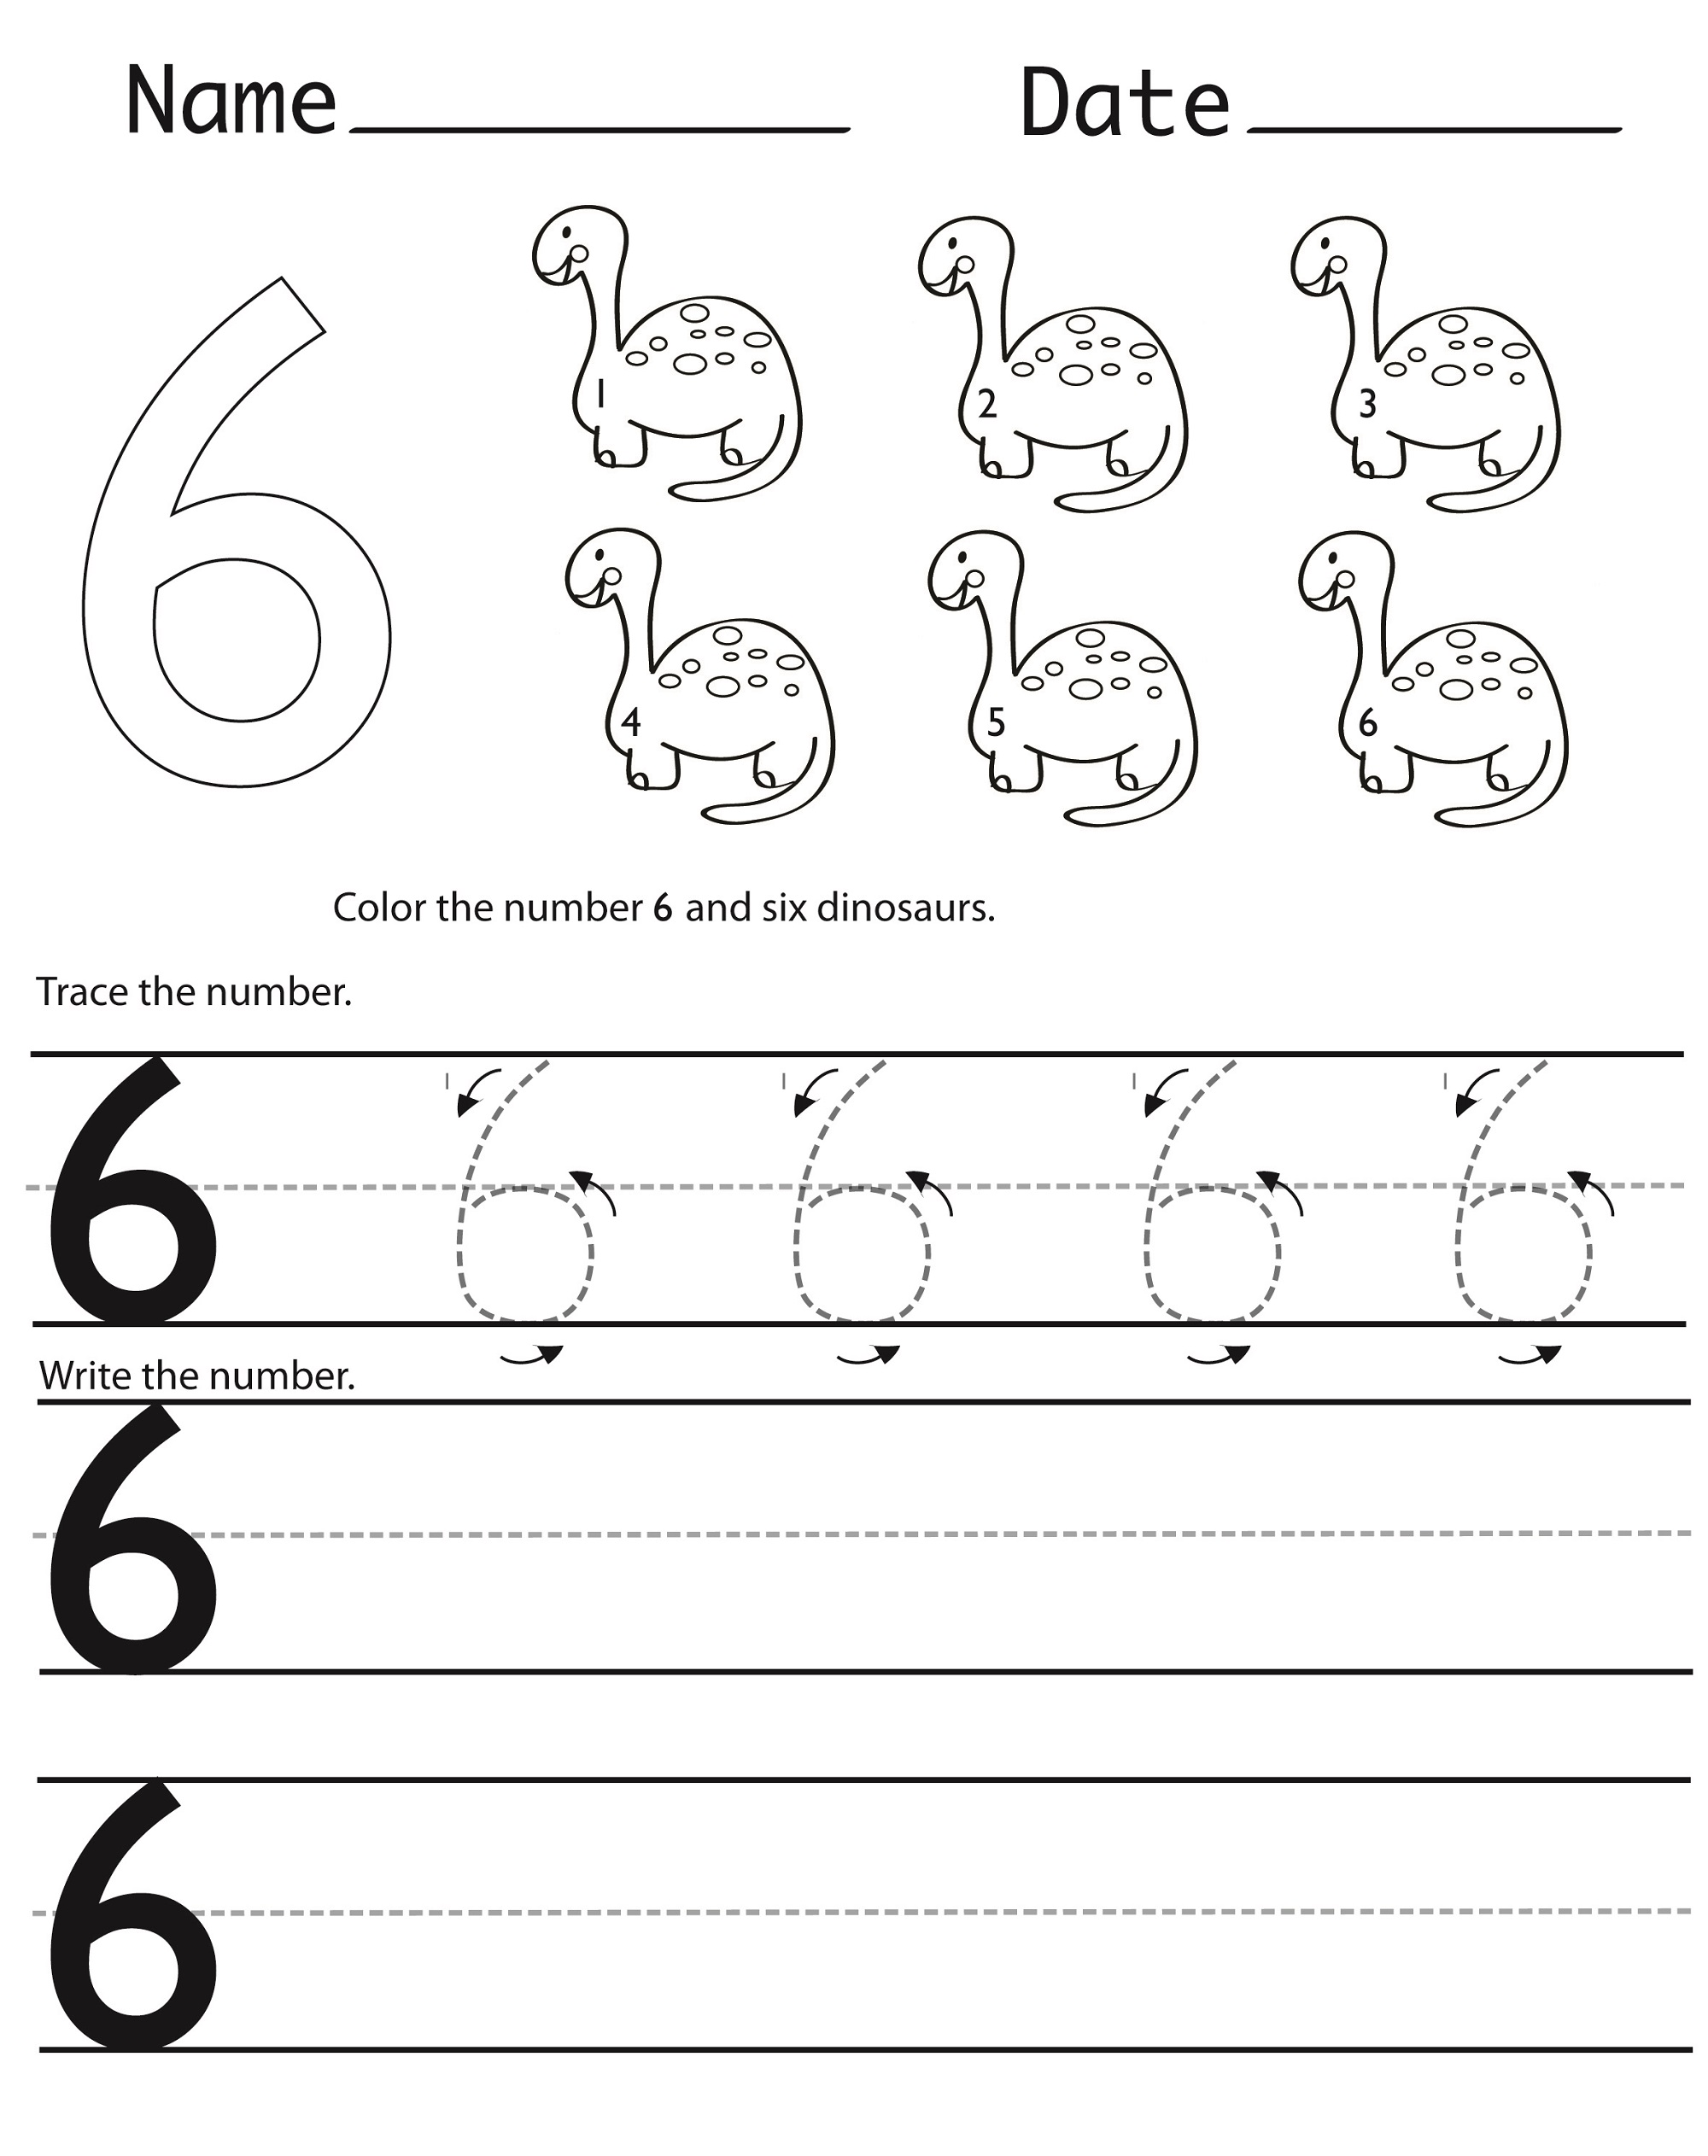 Collection Of Preschool Worksheets For The Number 6